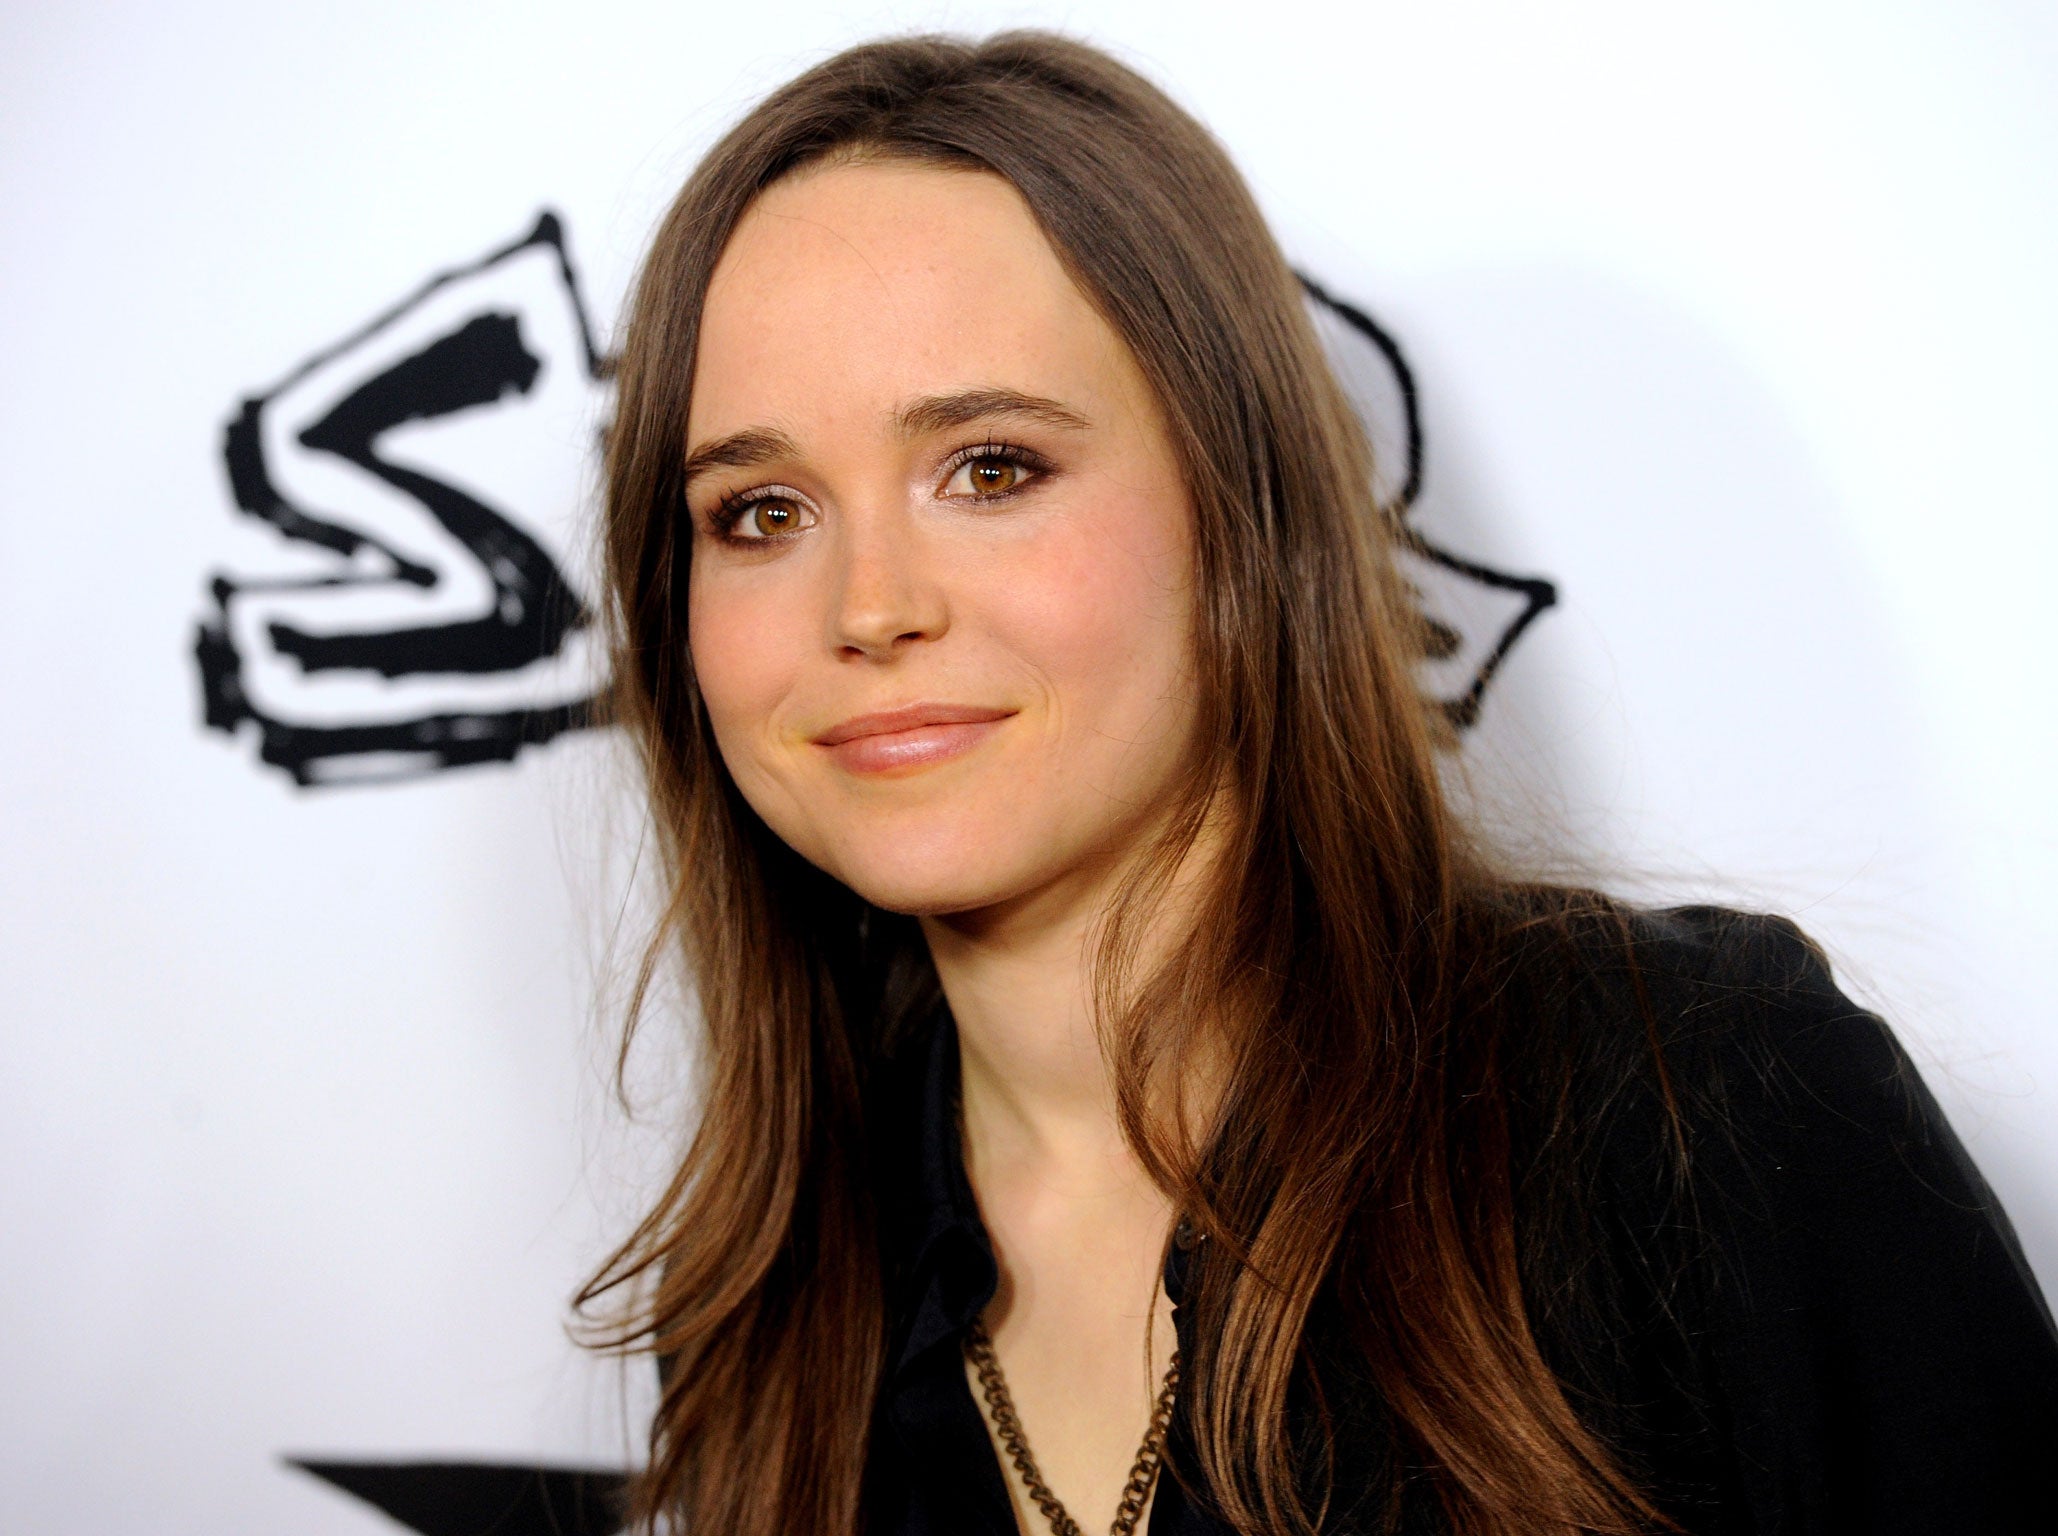 Actress Ellen Page has come out as a gay woman. She made the announcement in Las Vegas at the Human Rights Campaign's THRIVE conference.